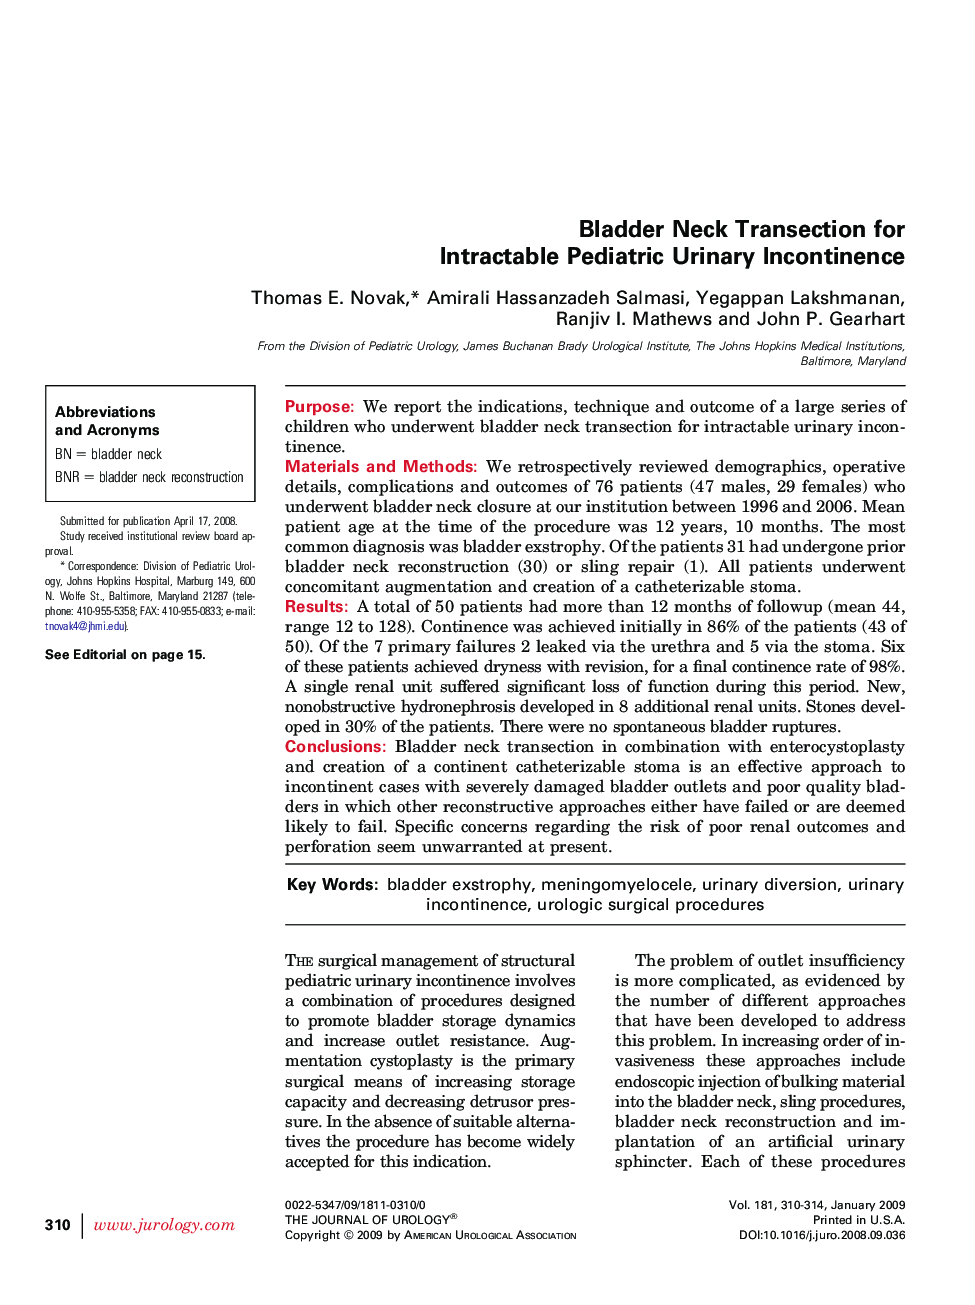 Bladder Neck Transection for Intractable Pediatric Urinary Incontinence